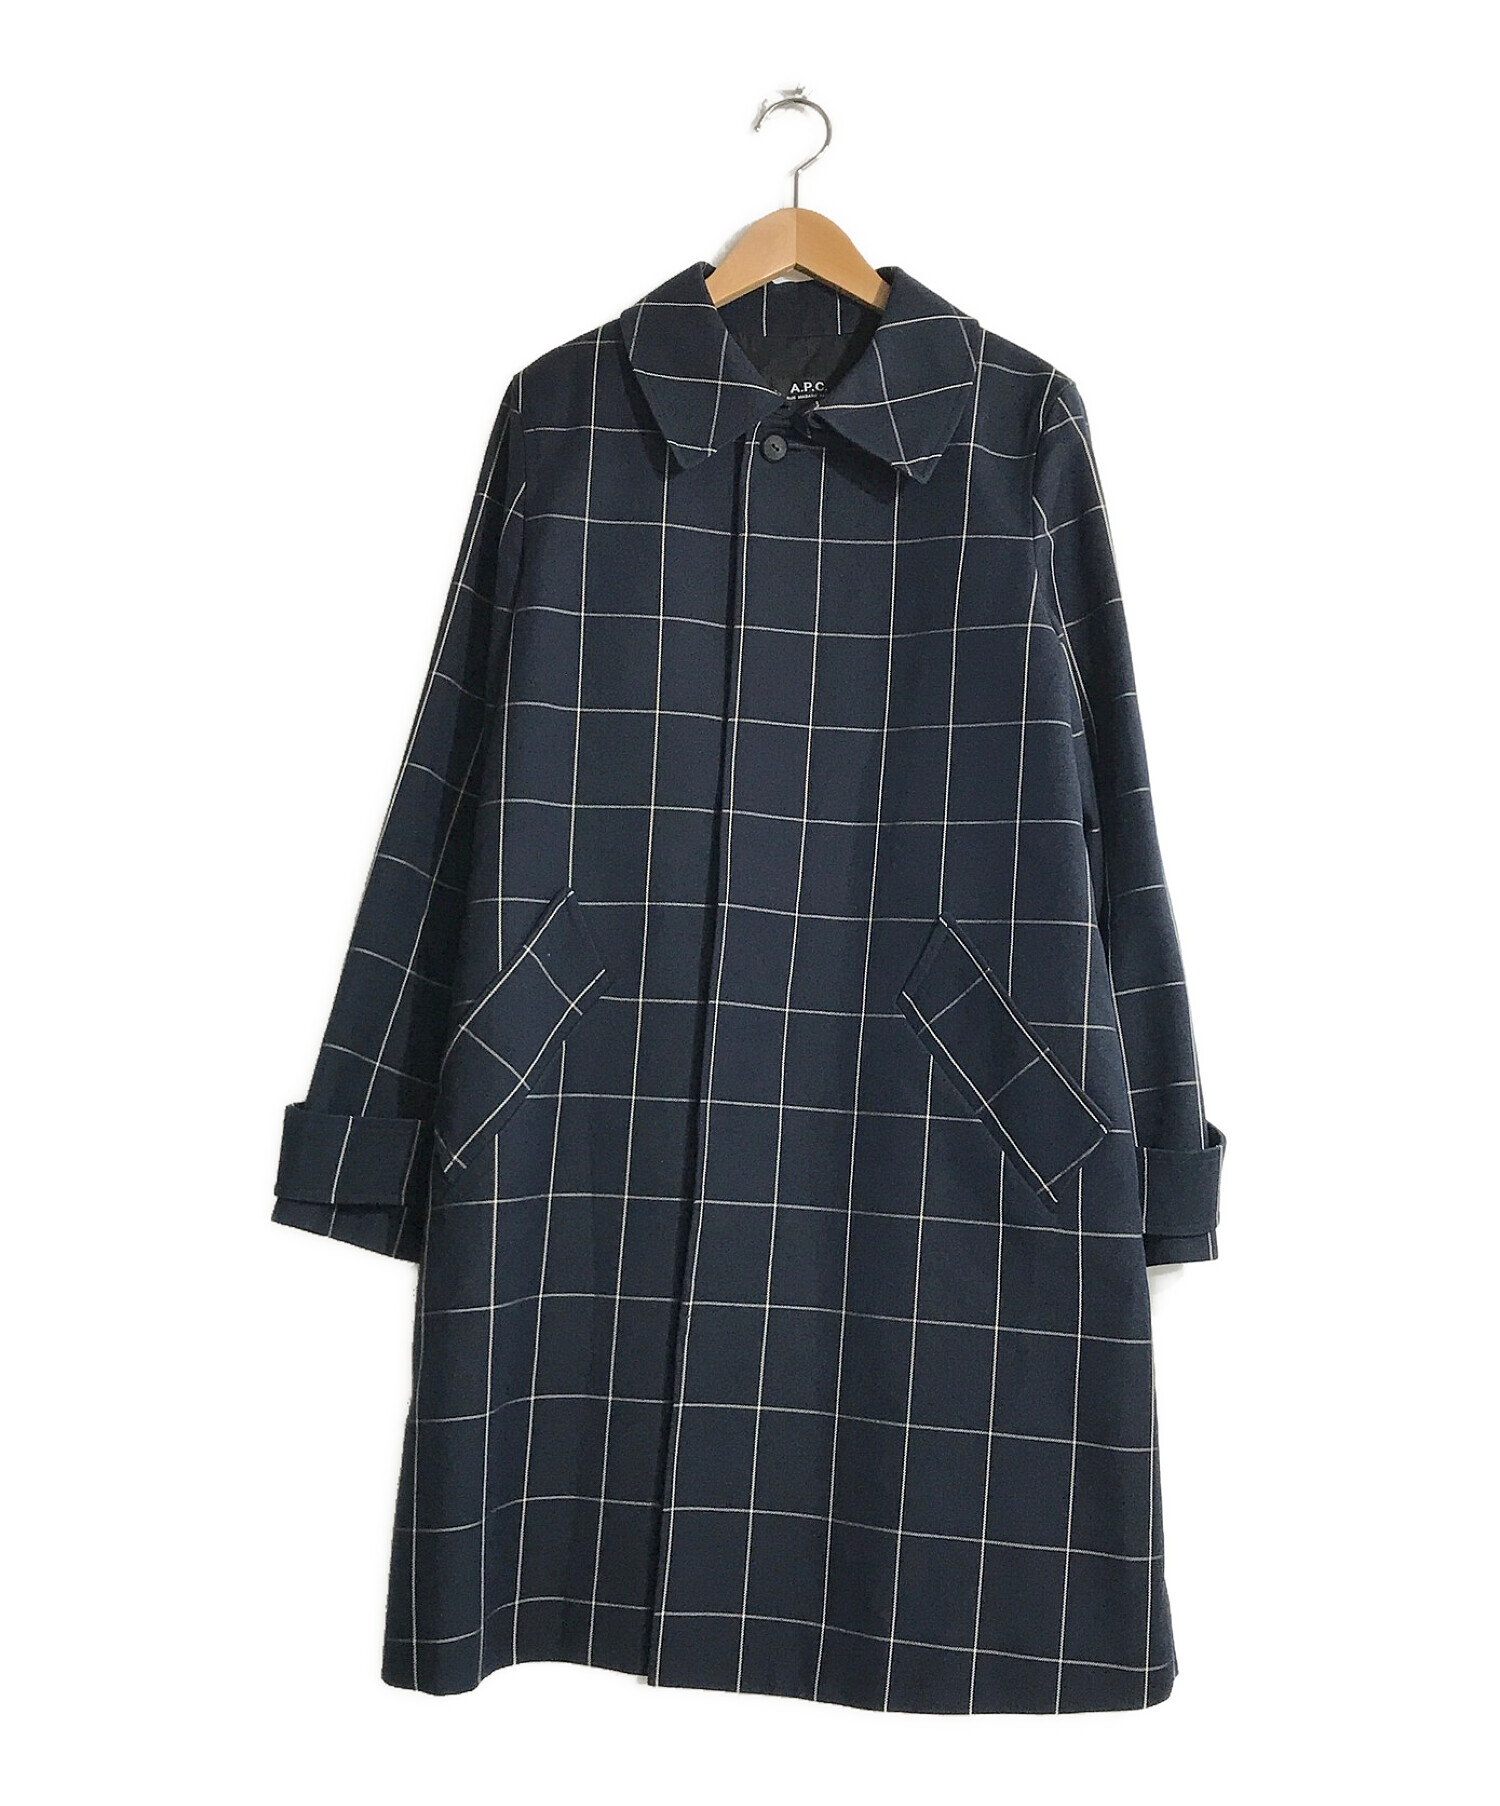 A.P.C. コート MADE IN FRANCE 36